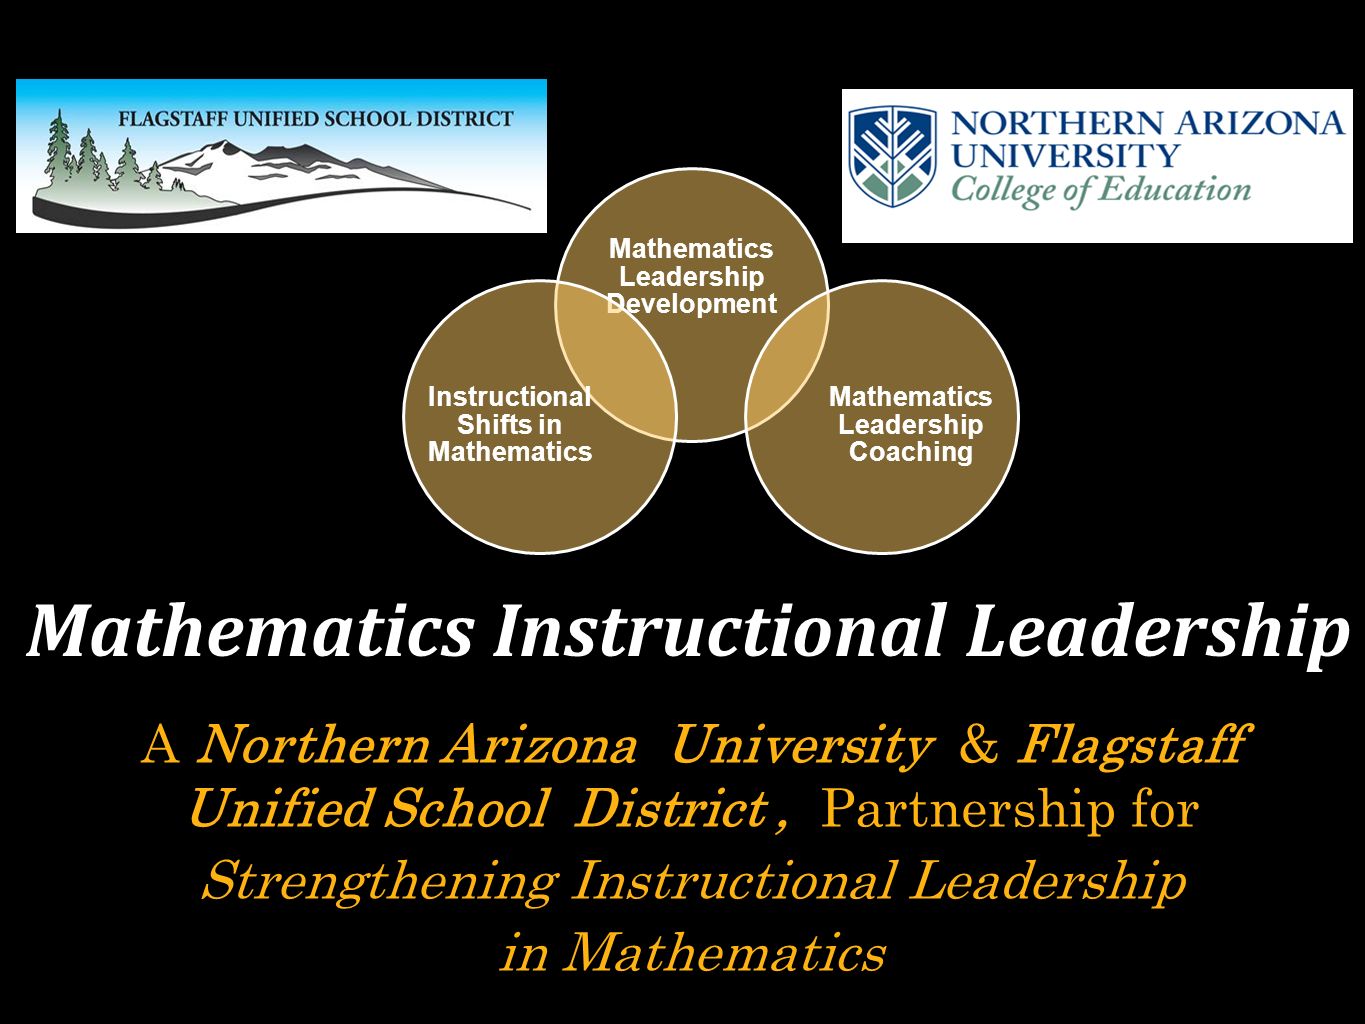 A Northern Arizona University & Flagstaff Unified School District, Partnership for Strengthening Instructional Leadership in Mathematics Mathematics Instructional Leadership Mathematics Leadership Development Mathematics Leadership Coaching Instructional Shifts in Mathematics